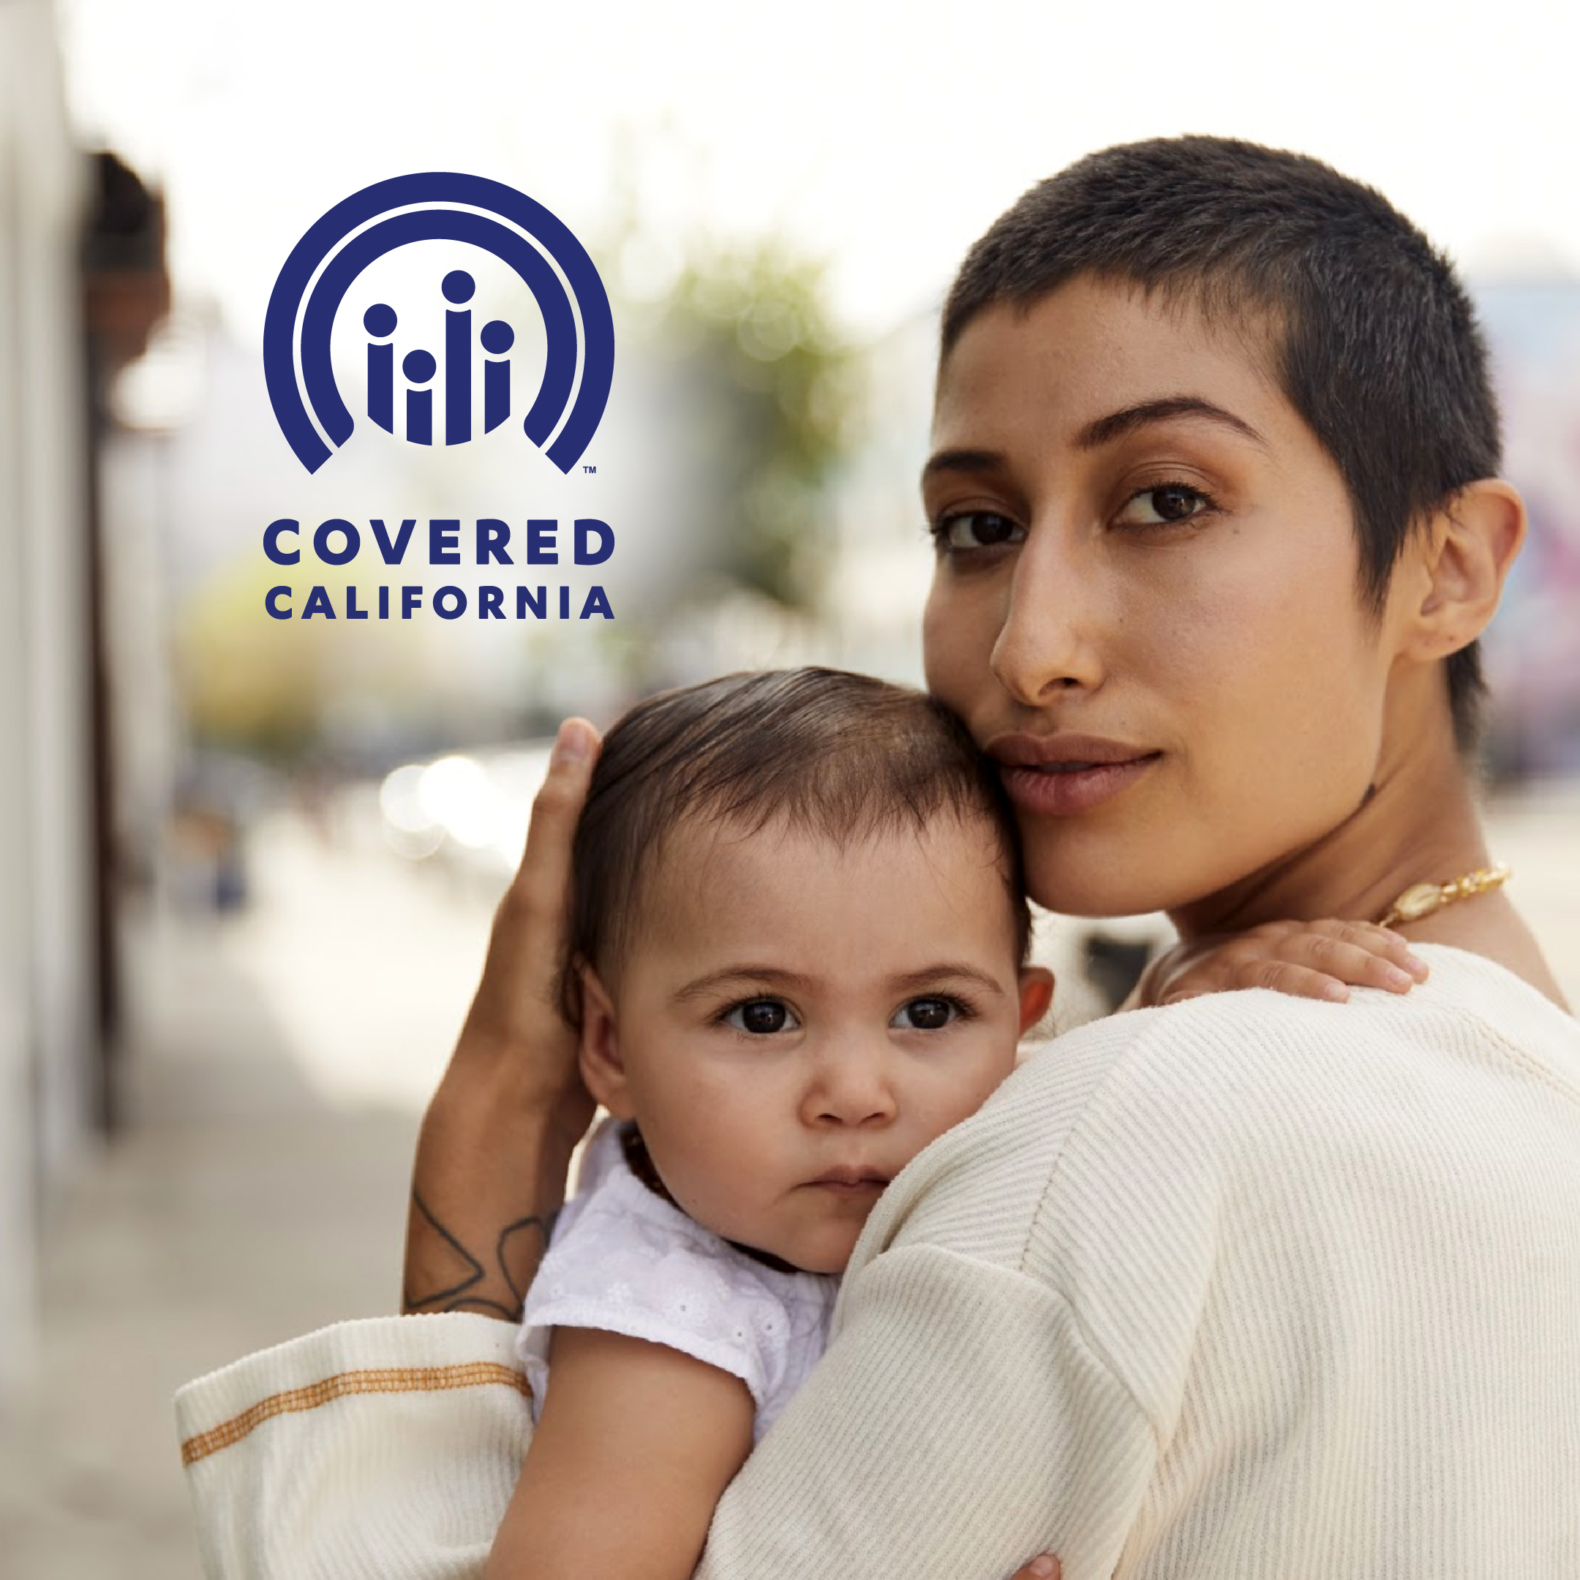 Female identified person with short-cropped brown hair, holding a baby to her chest. Covered California Logo overlays image in upper left corner.